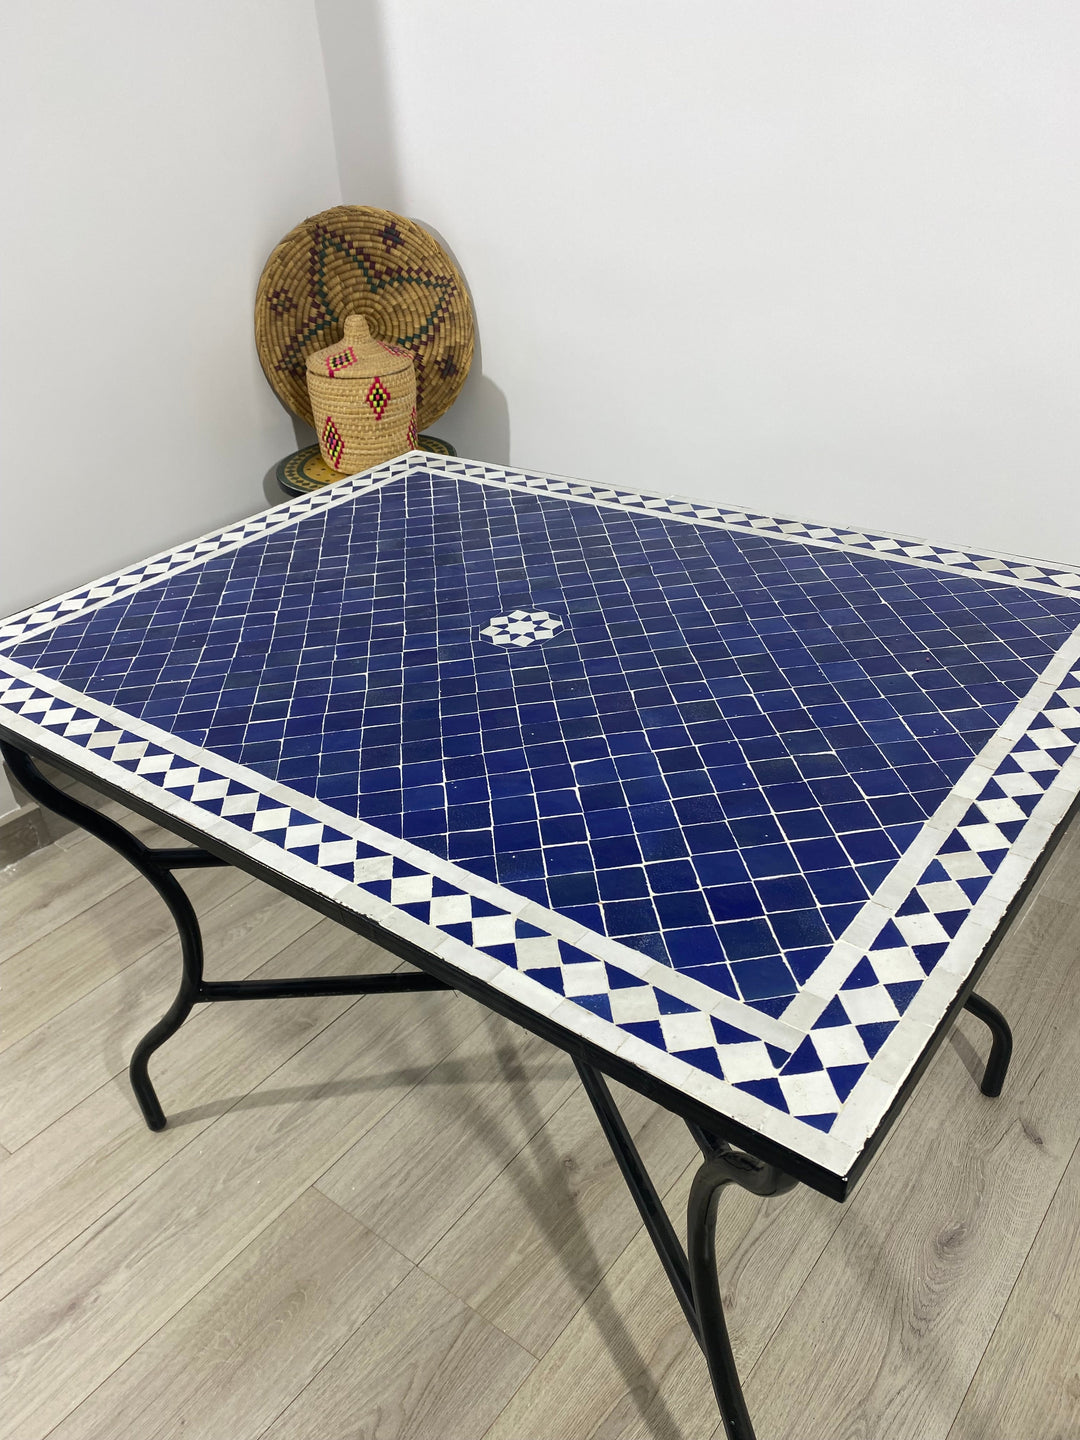 Moroccan blue mosaic Table for outdoor & indoor made Mosaic tiles, 100% handcrafted